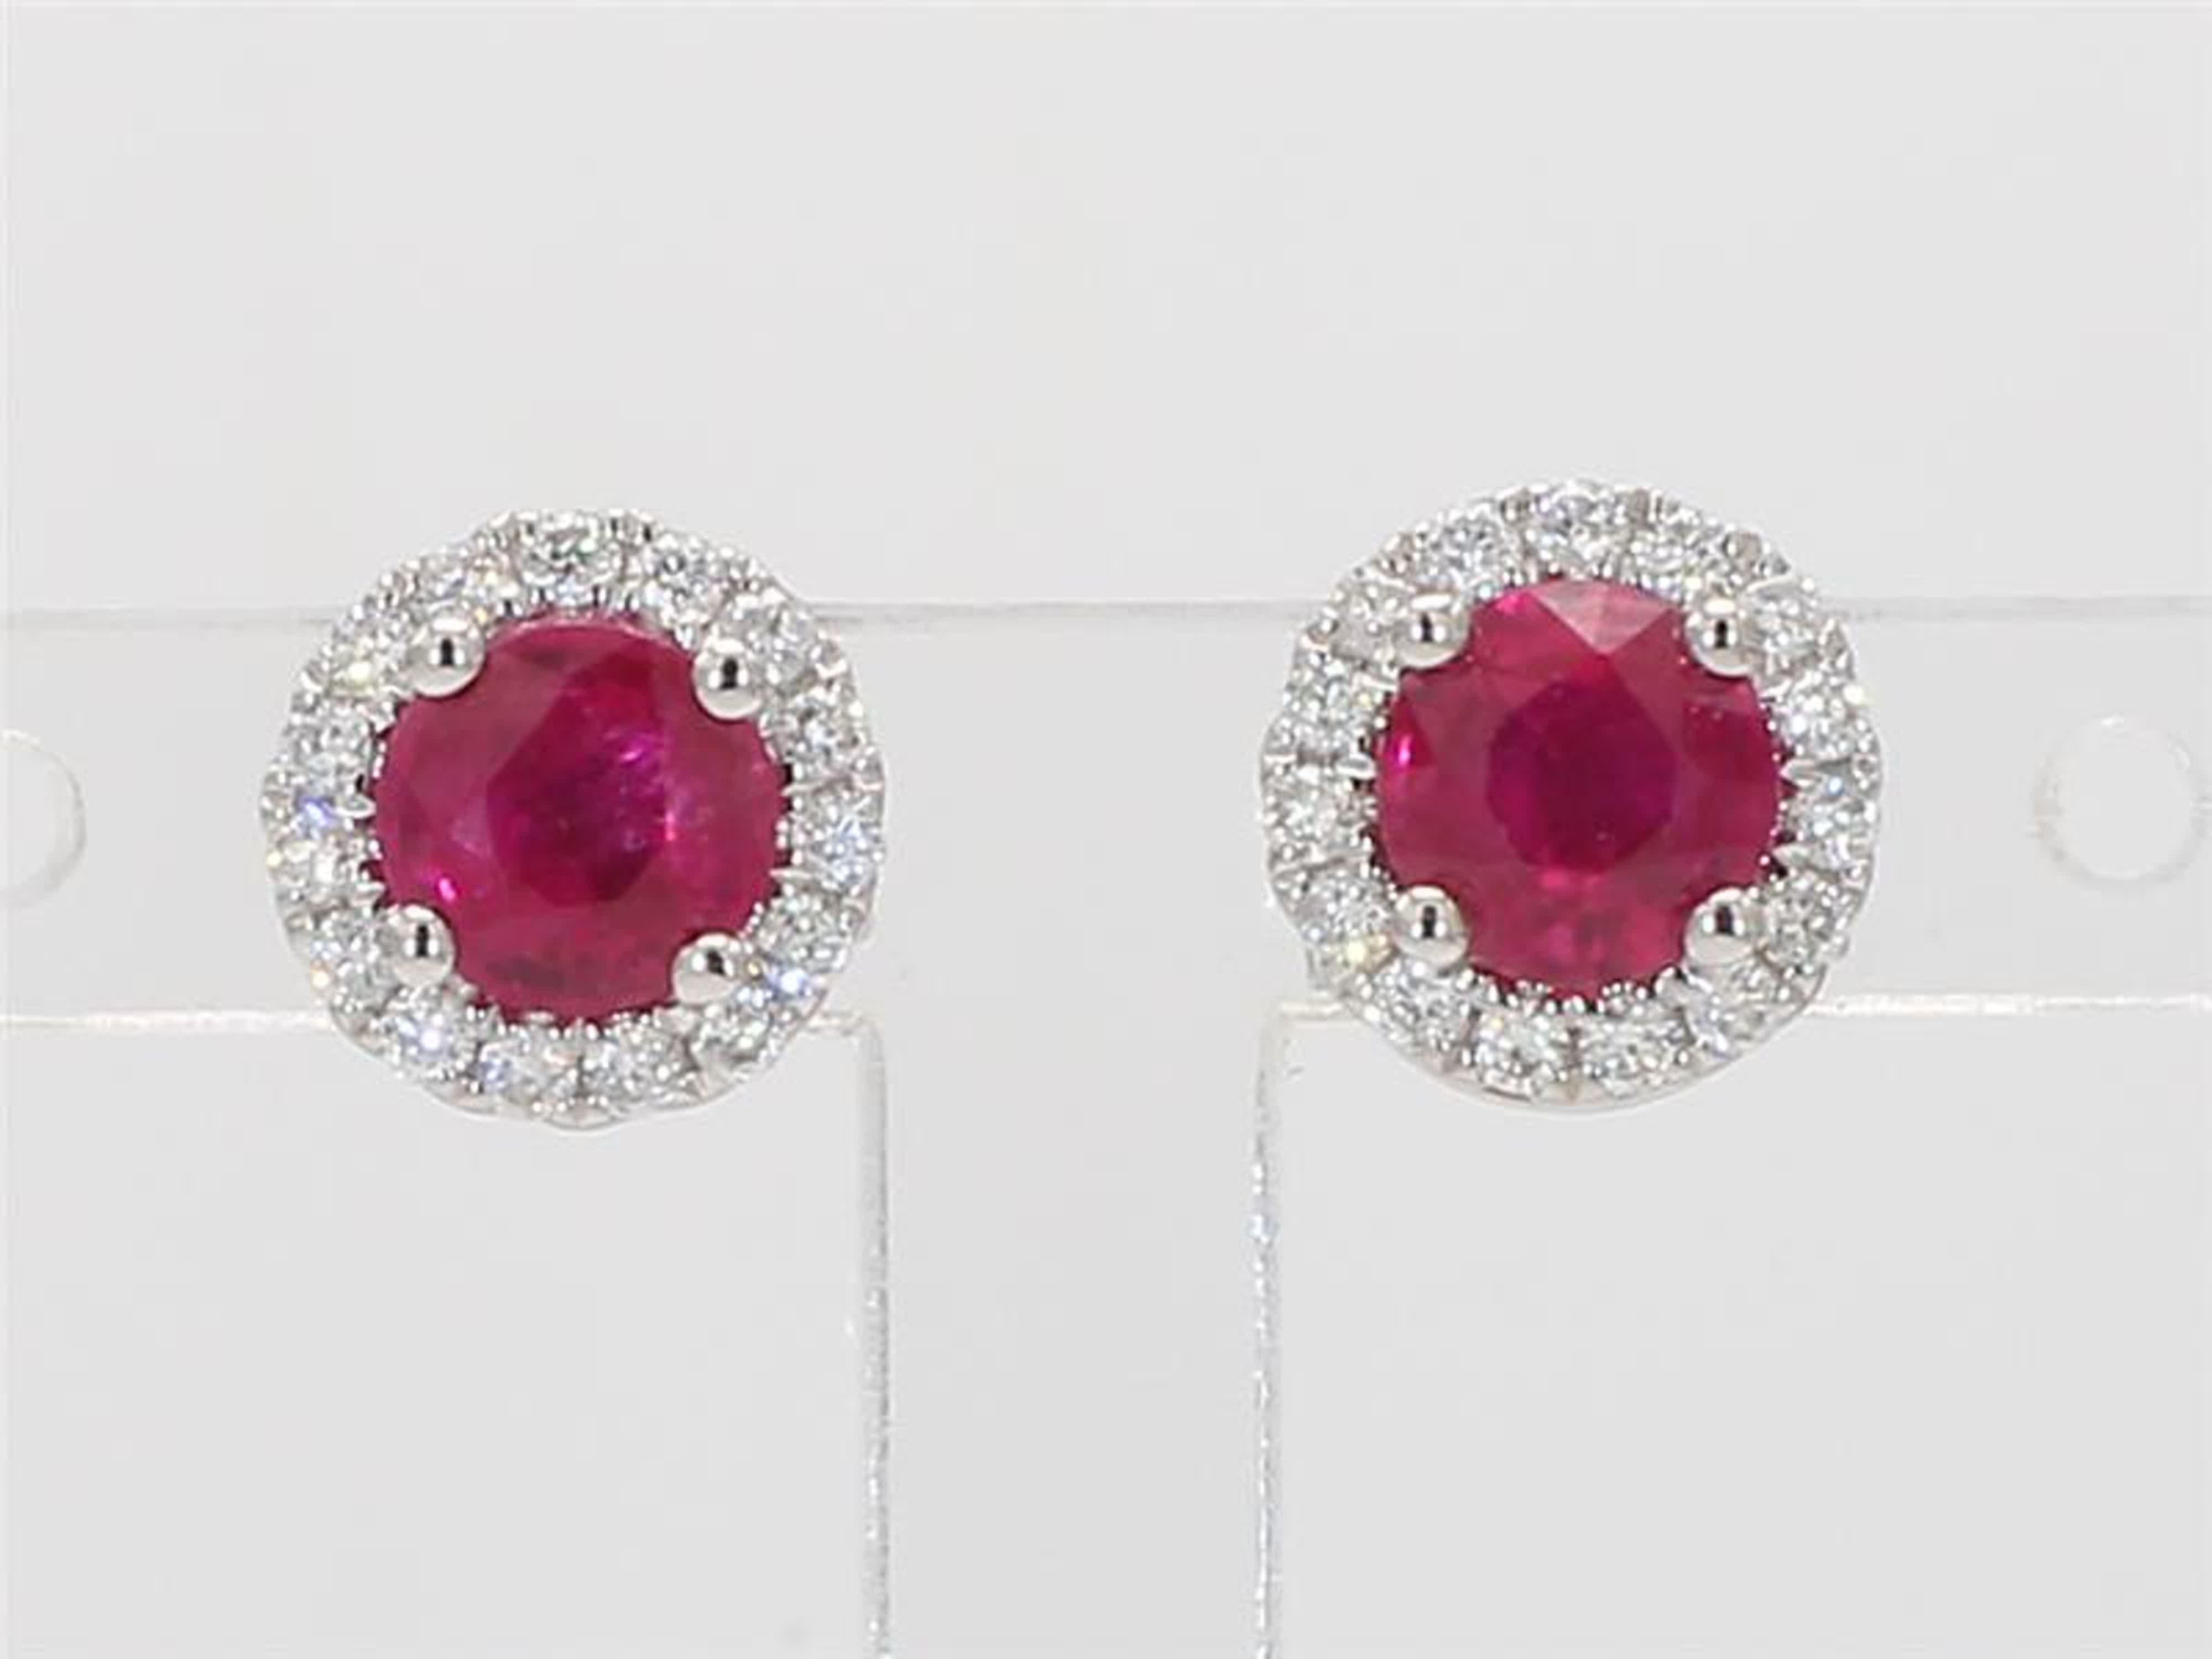 RareGemWorld's classic ruby earrings. Mounted in a beautiful 14K White Gold setting with natural round cut red ruby's. These ruby's are surrounded by a halo of natural round white diamond melee. These earrings are guaranteed to impress and enhance